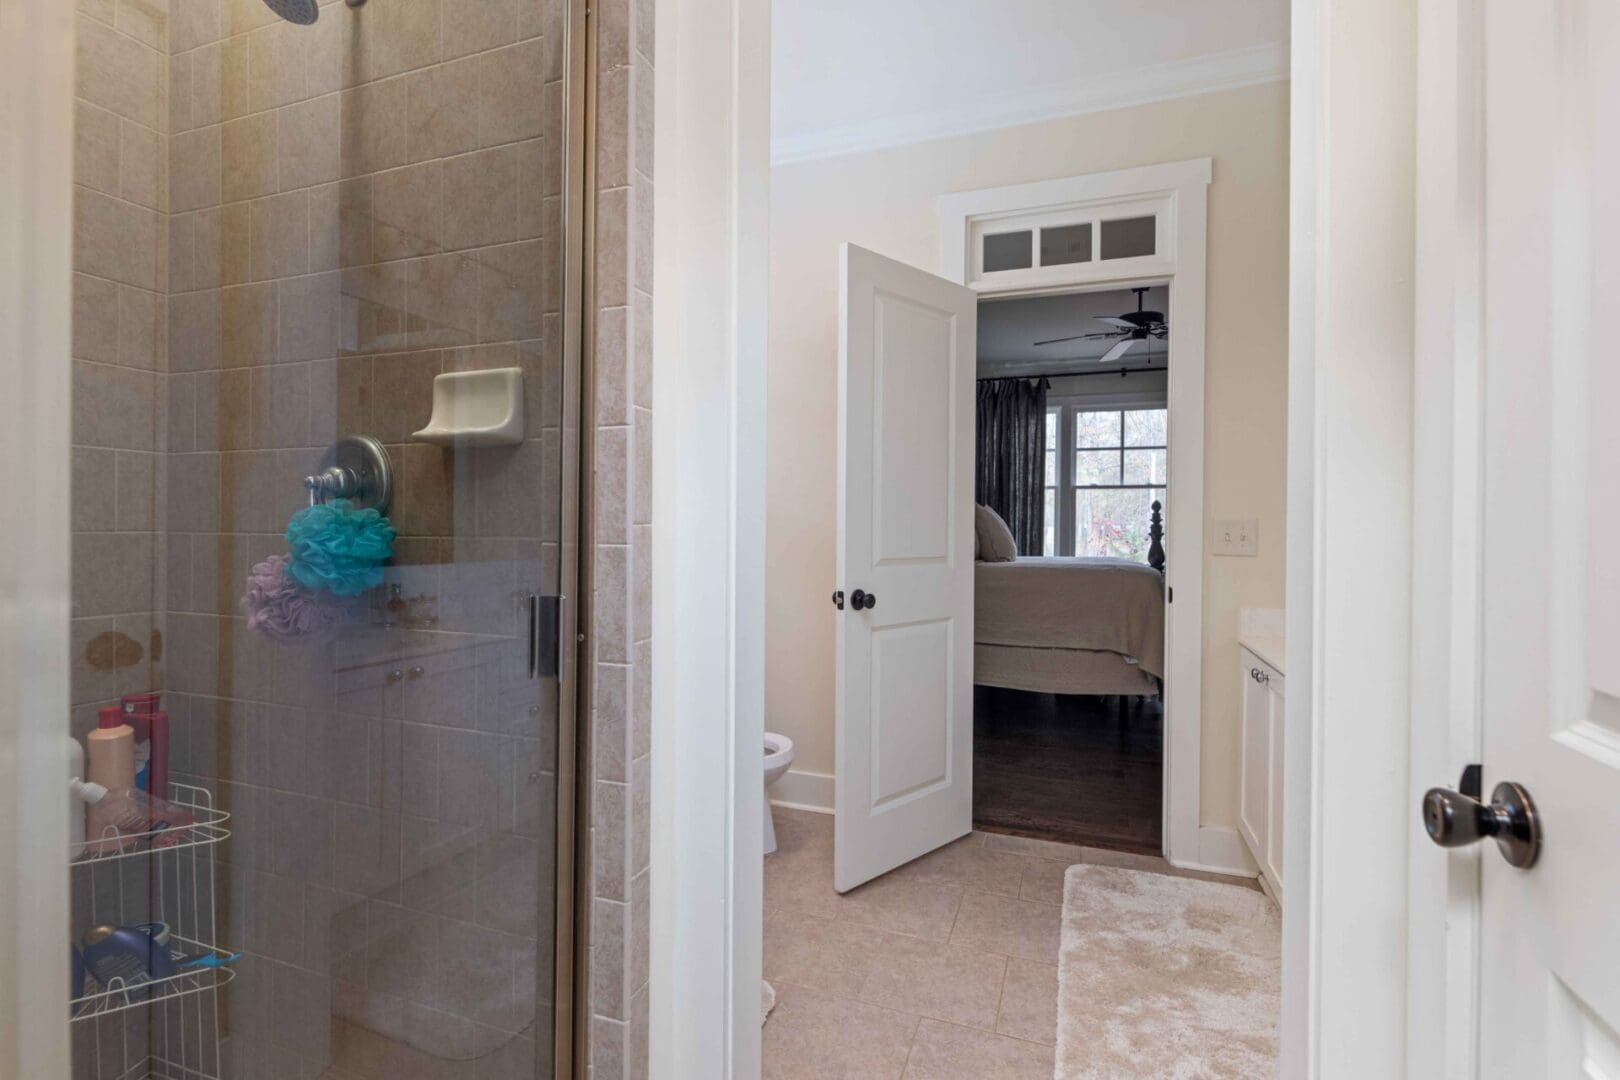 A bathroom with a shower and tiled floor